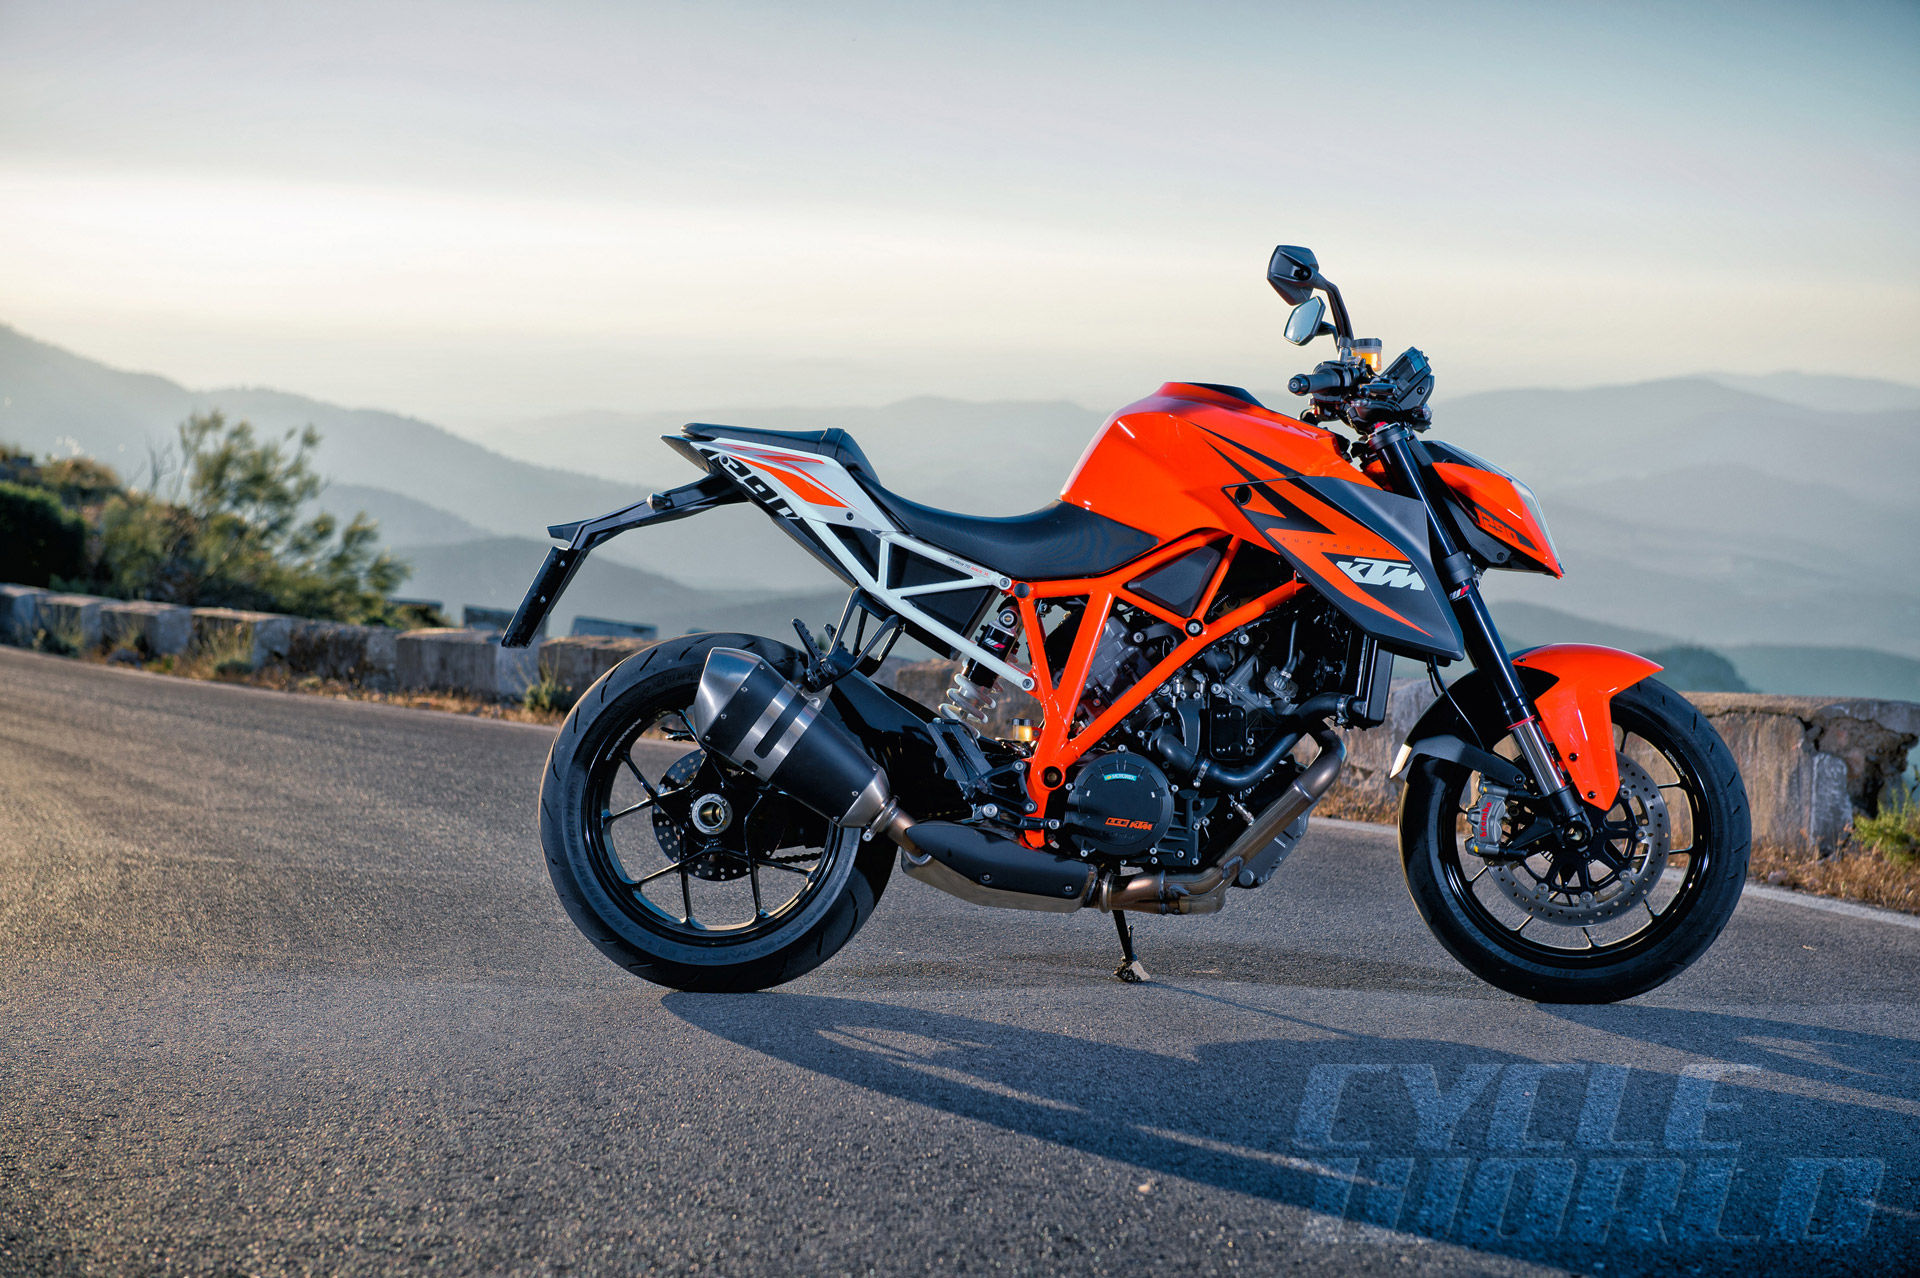 2016 KTM 1290 Super Duke R - WHAT I'VE BEEN RIDING | Cycle World